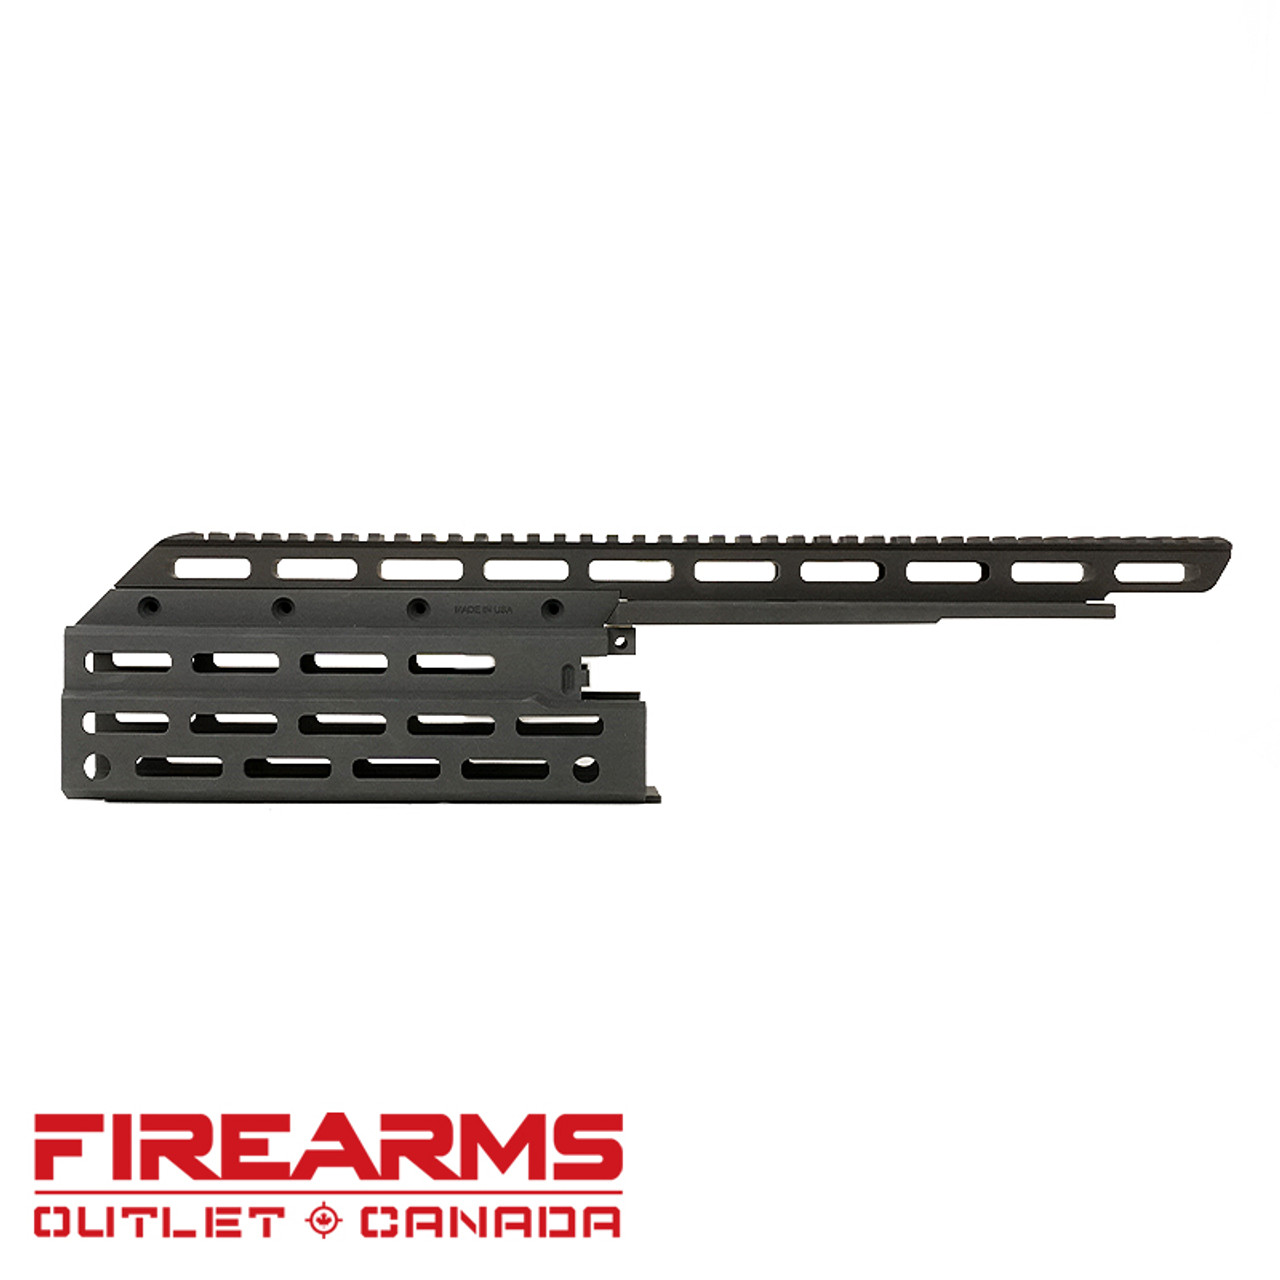 Manticore Arms - X95 Cantilever Forend (AR-15 Height Rail) Gen 2 [MA-27500]